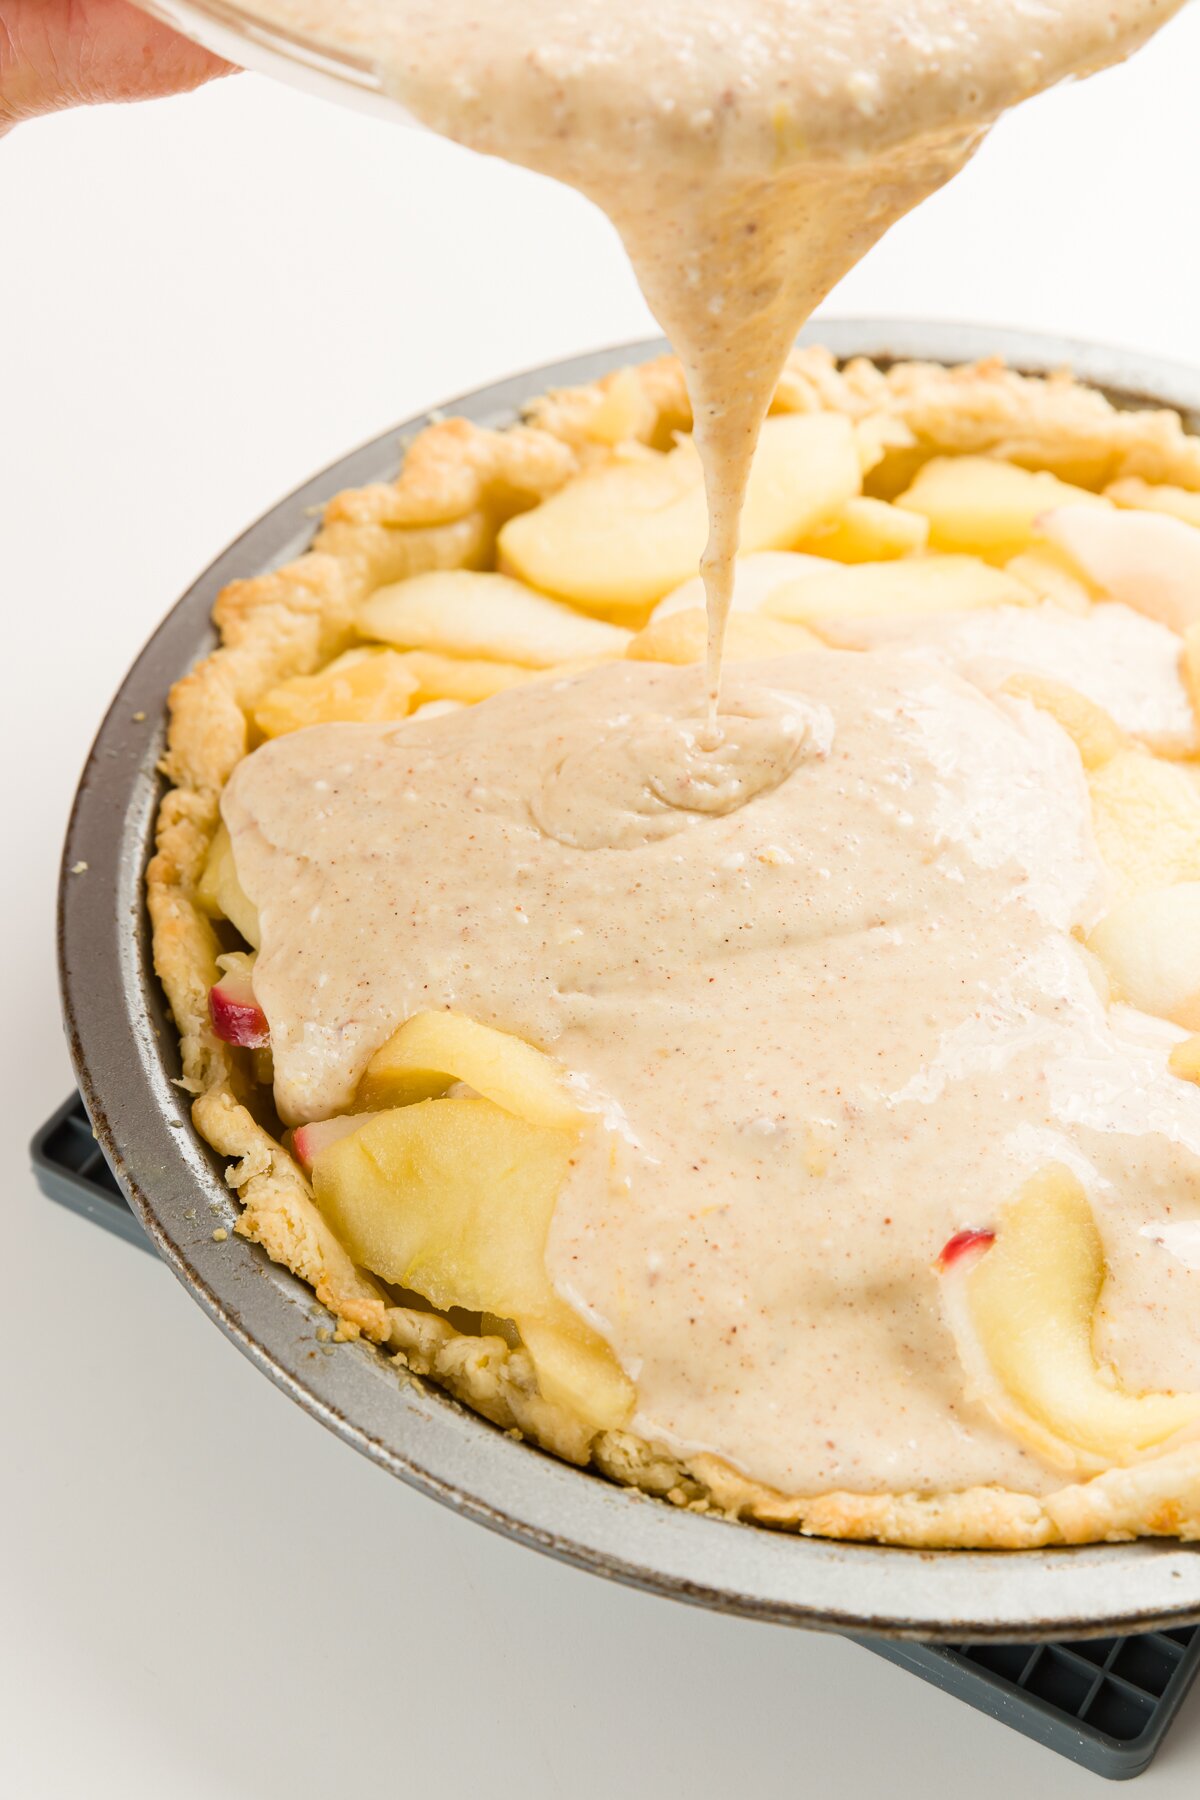 Pouring custard over apples in a pie pan